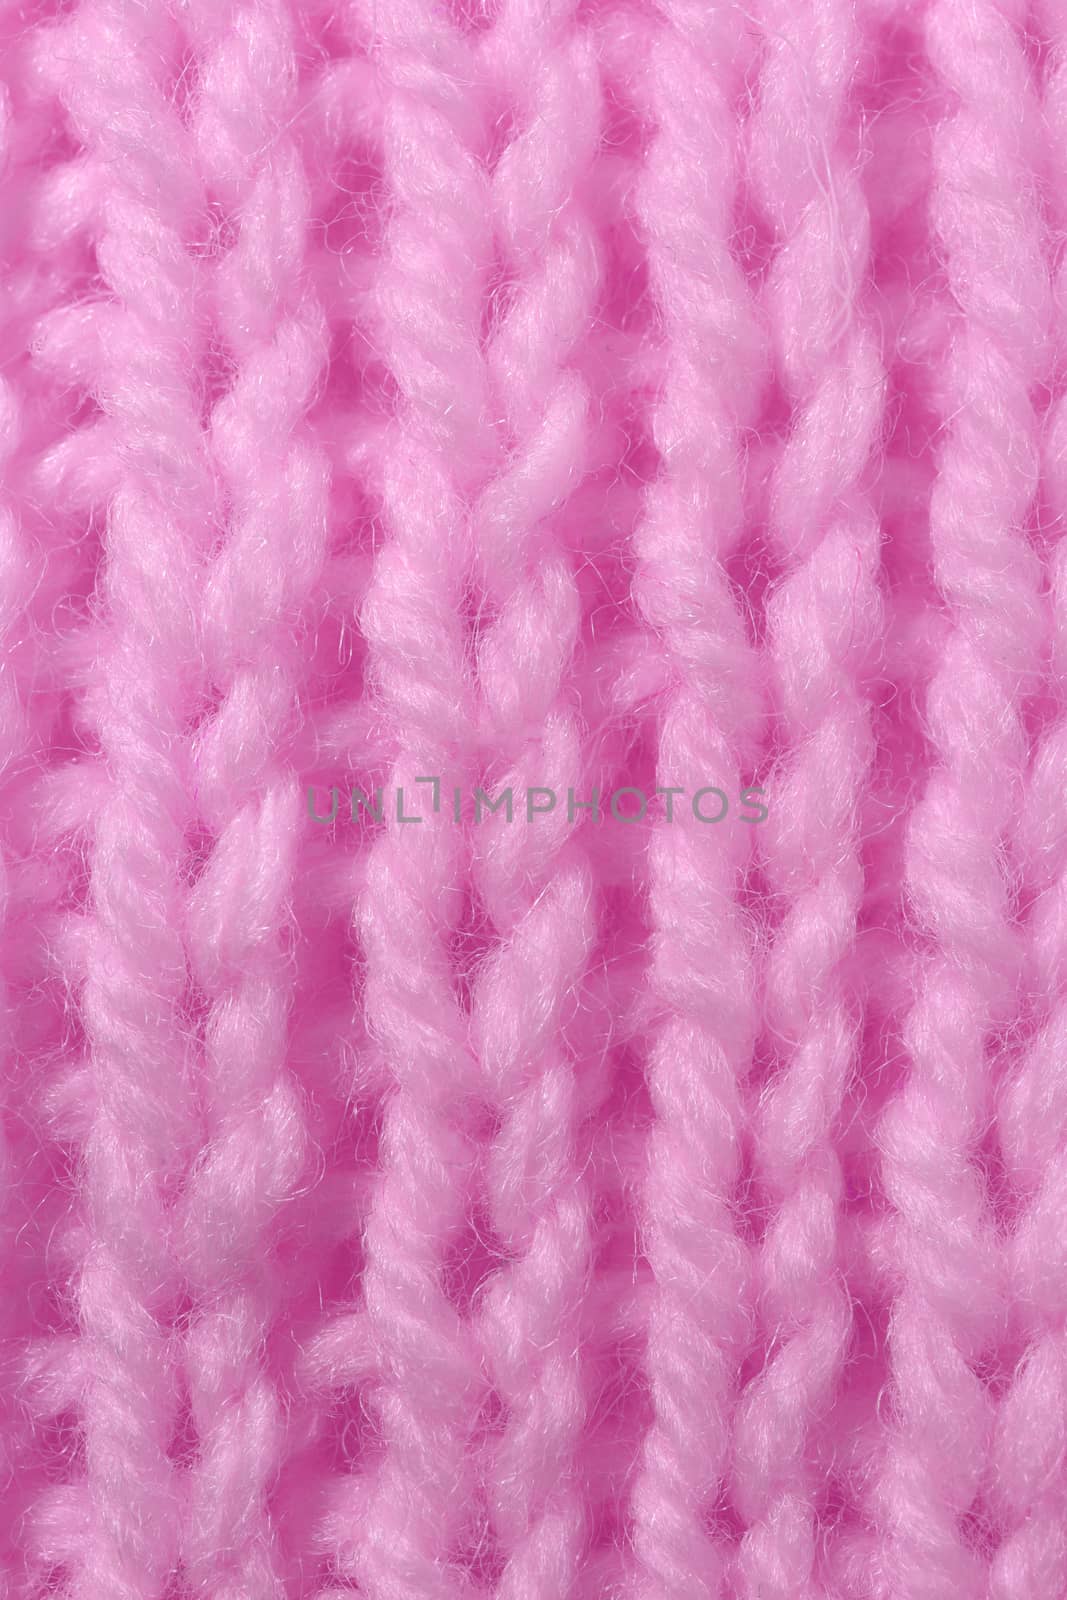 Pink Wool Knitting Texture. Vertical Across Weaving Crochet Detailed Rows. Sweater Textile Background. Macro Closeup.